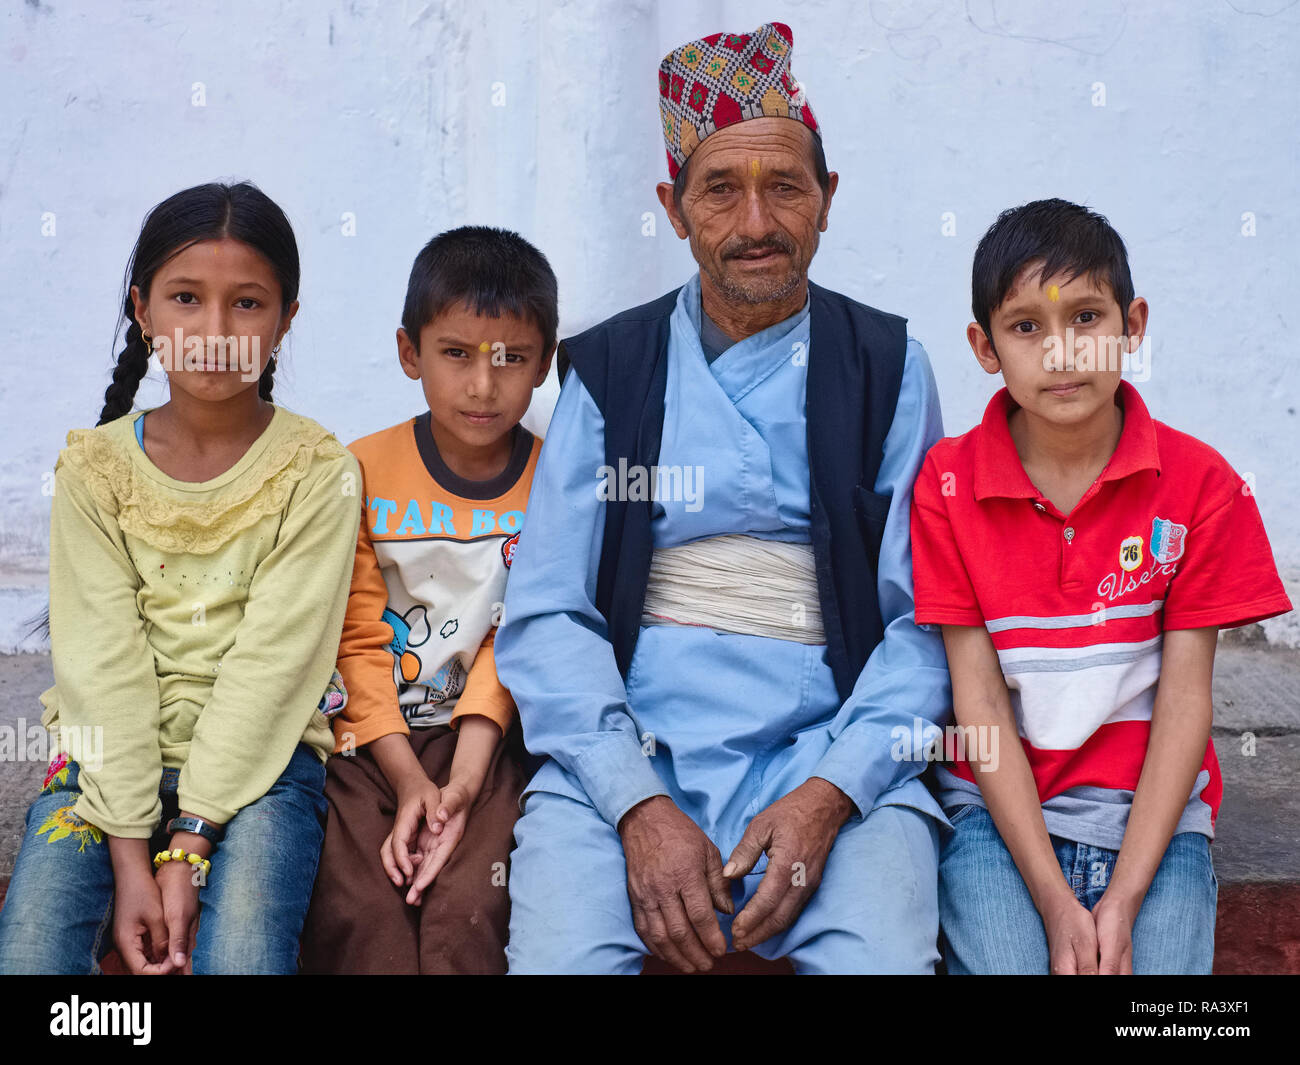 A family portrait in Kathmandu, Nepal, with the father in traditional Nepalese attire, and three children, minus the mother Stock Photo